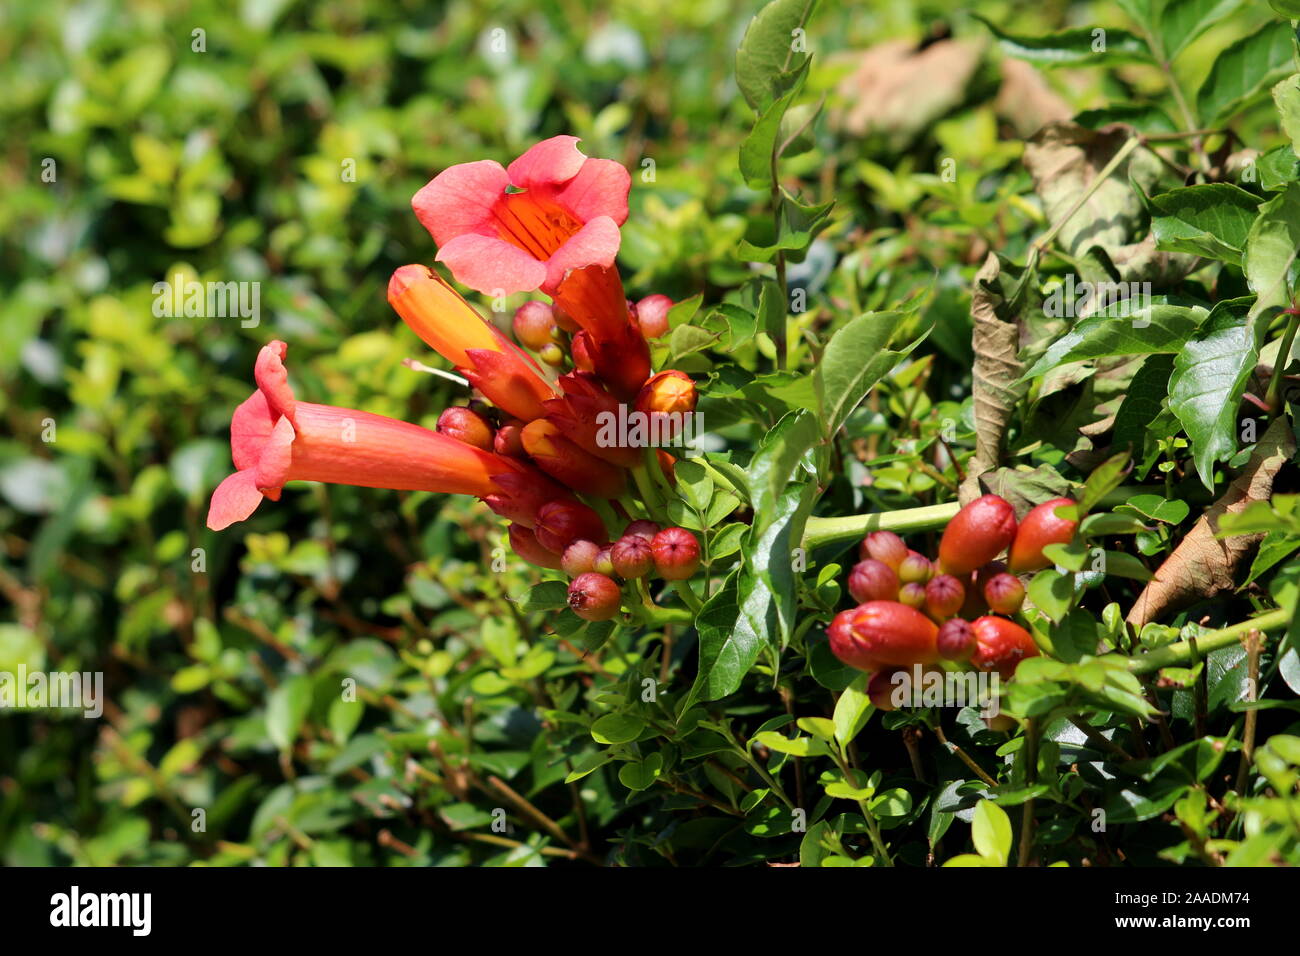 Large bunch of Trumpet vine or Campsis radicans or Trumpet creeper or Cow itch vine or Hummingbird vine flowering deciduous woody vine plant Stock Photo